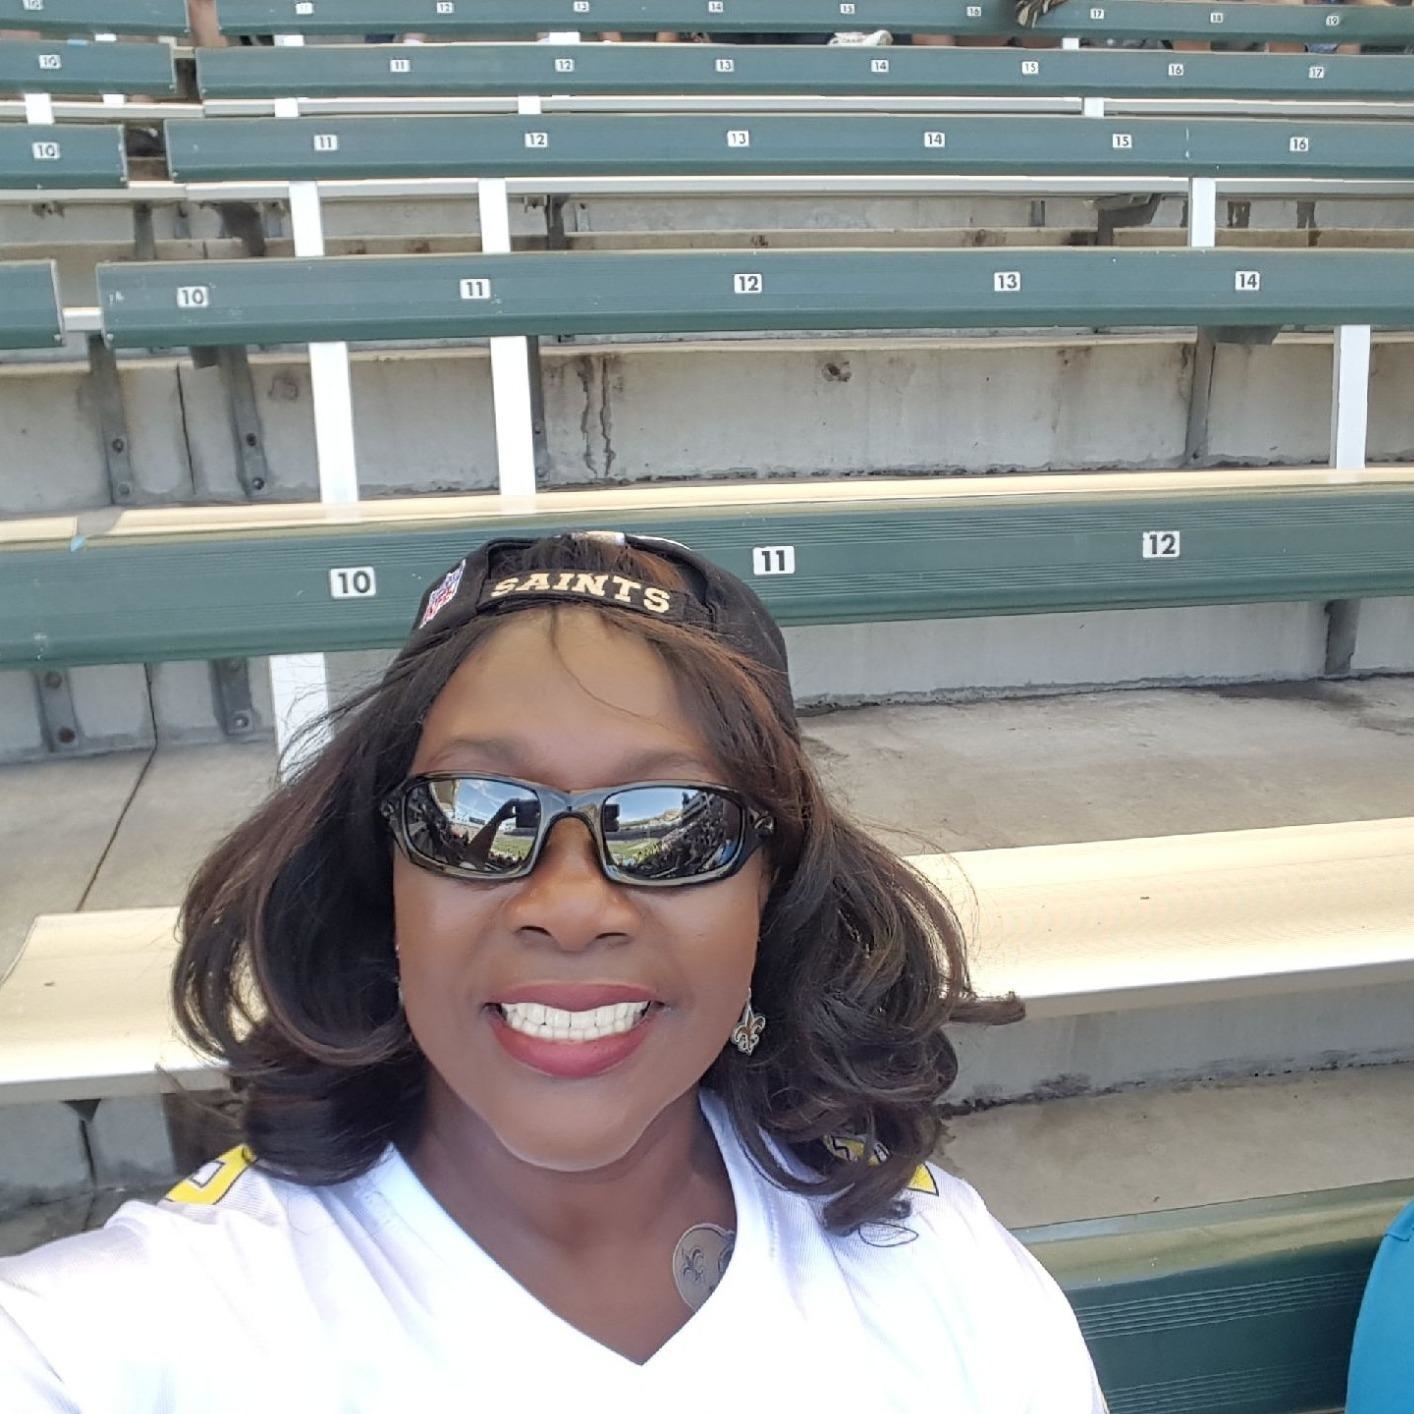 Woman in a &quot;Saints&quot; cap and sunglasses smiles in selfie at a mostly empty stadium